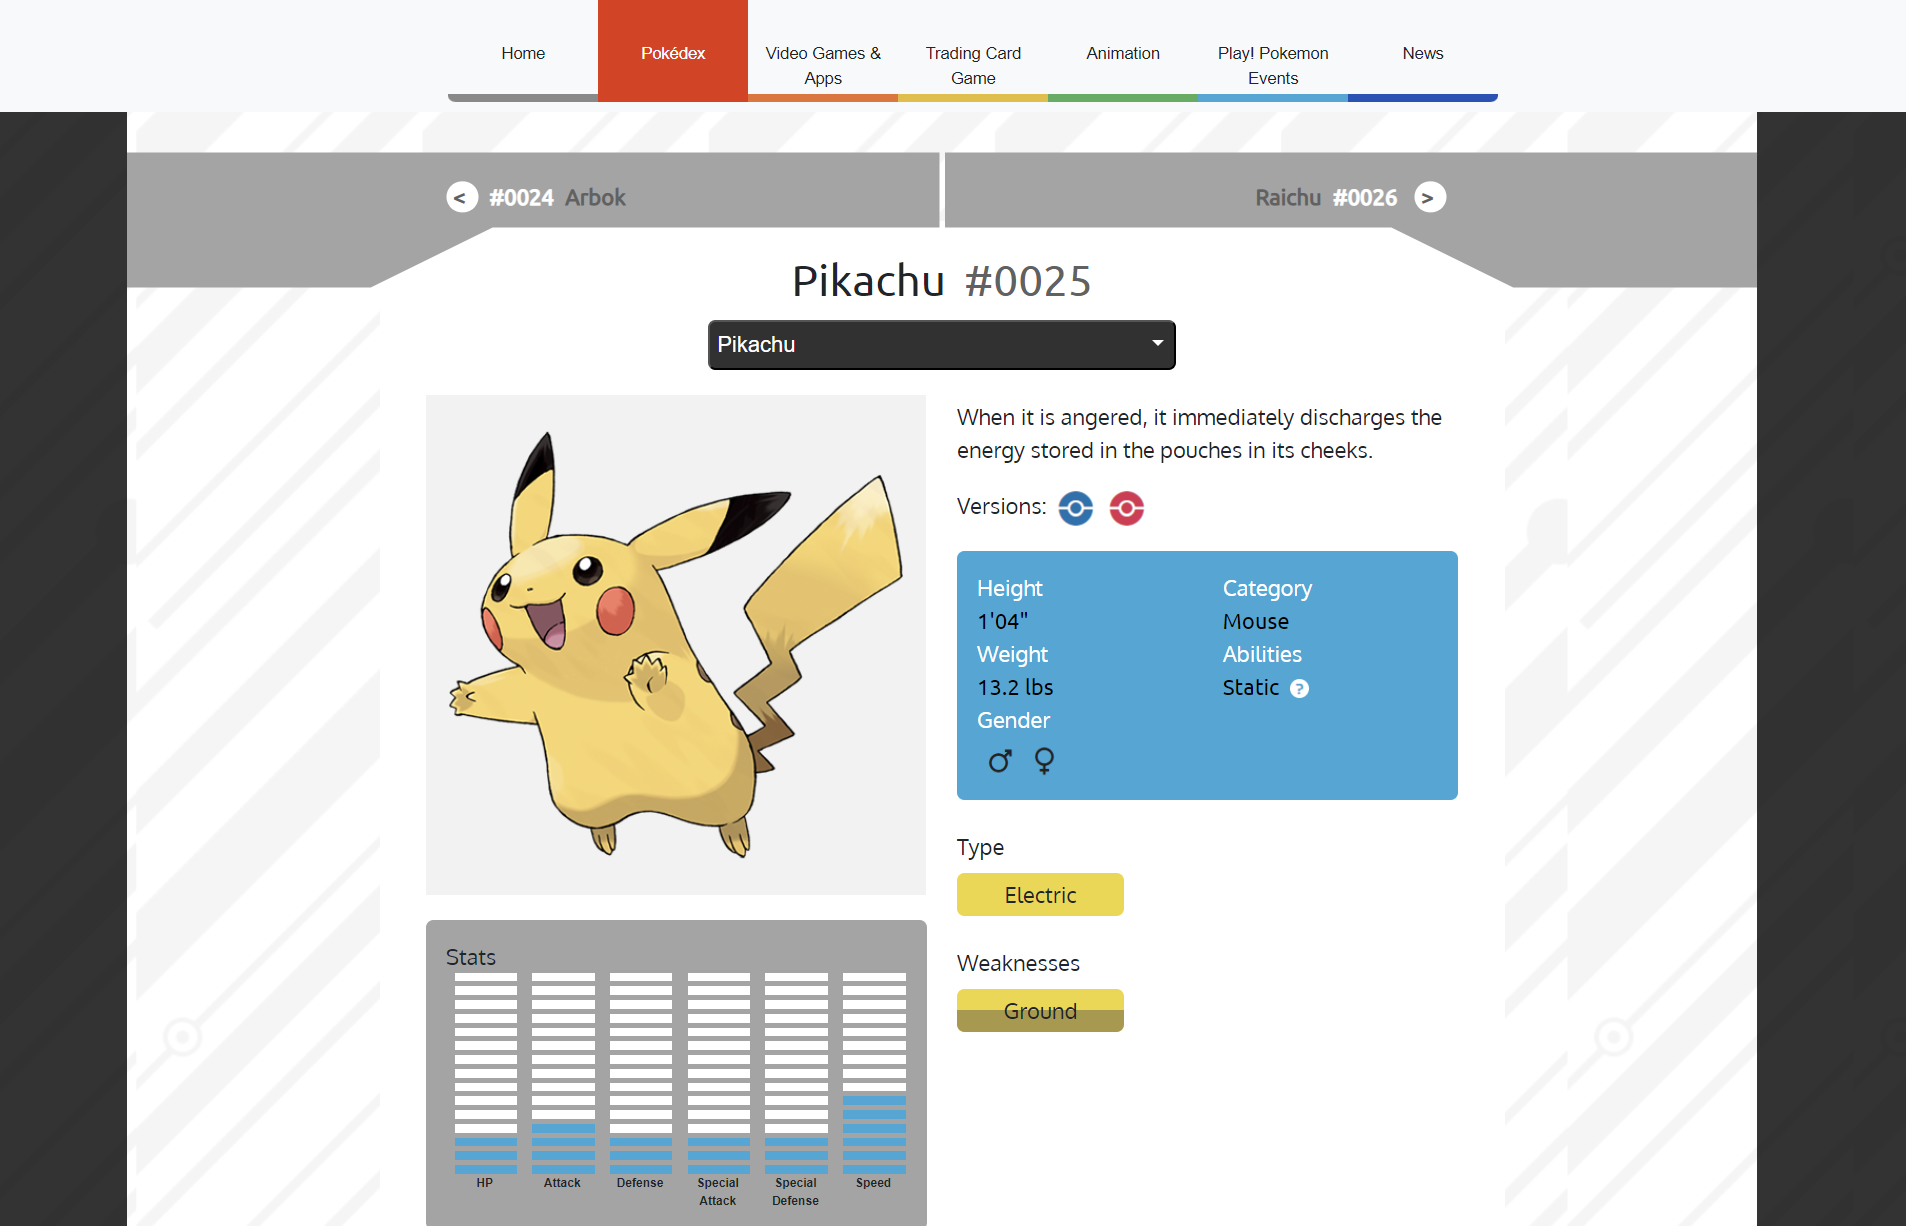 Recreating Pikachu's Pokédex page with HTML Bootstrap and CSS